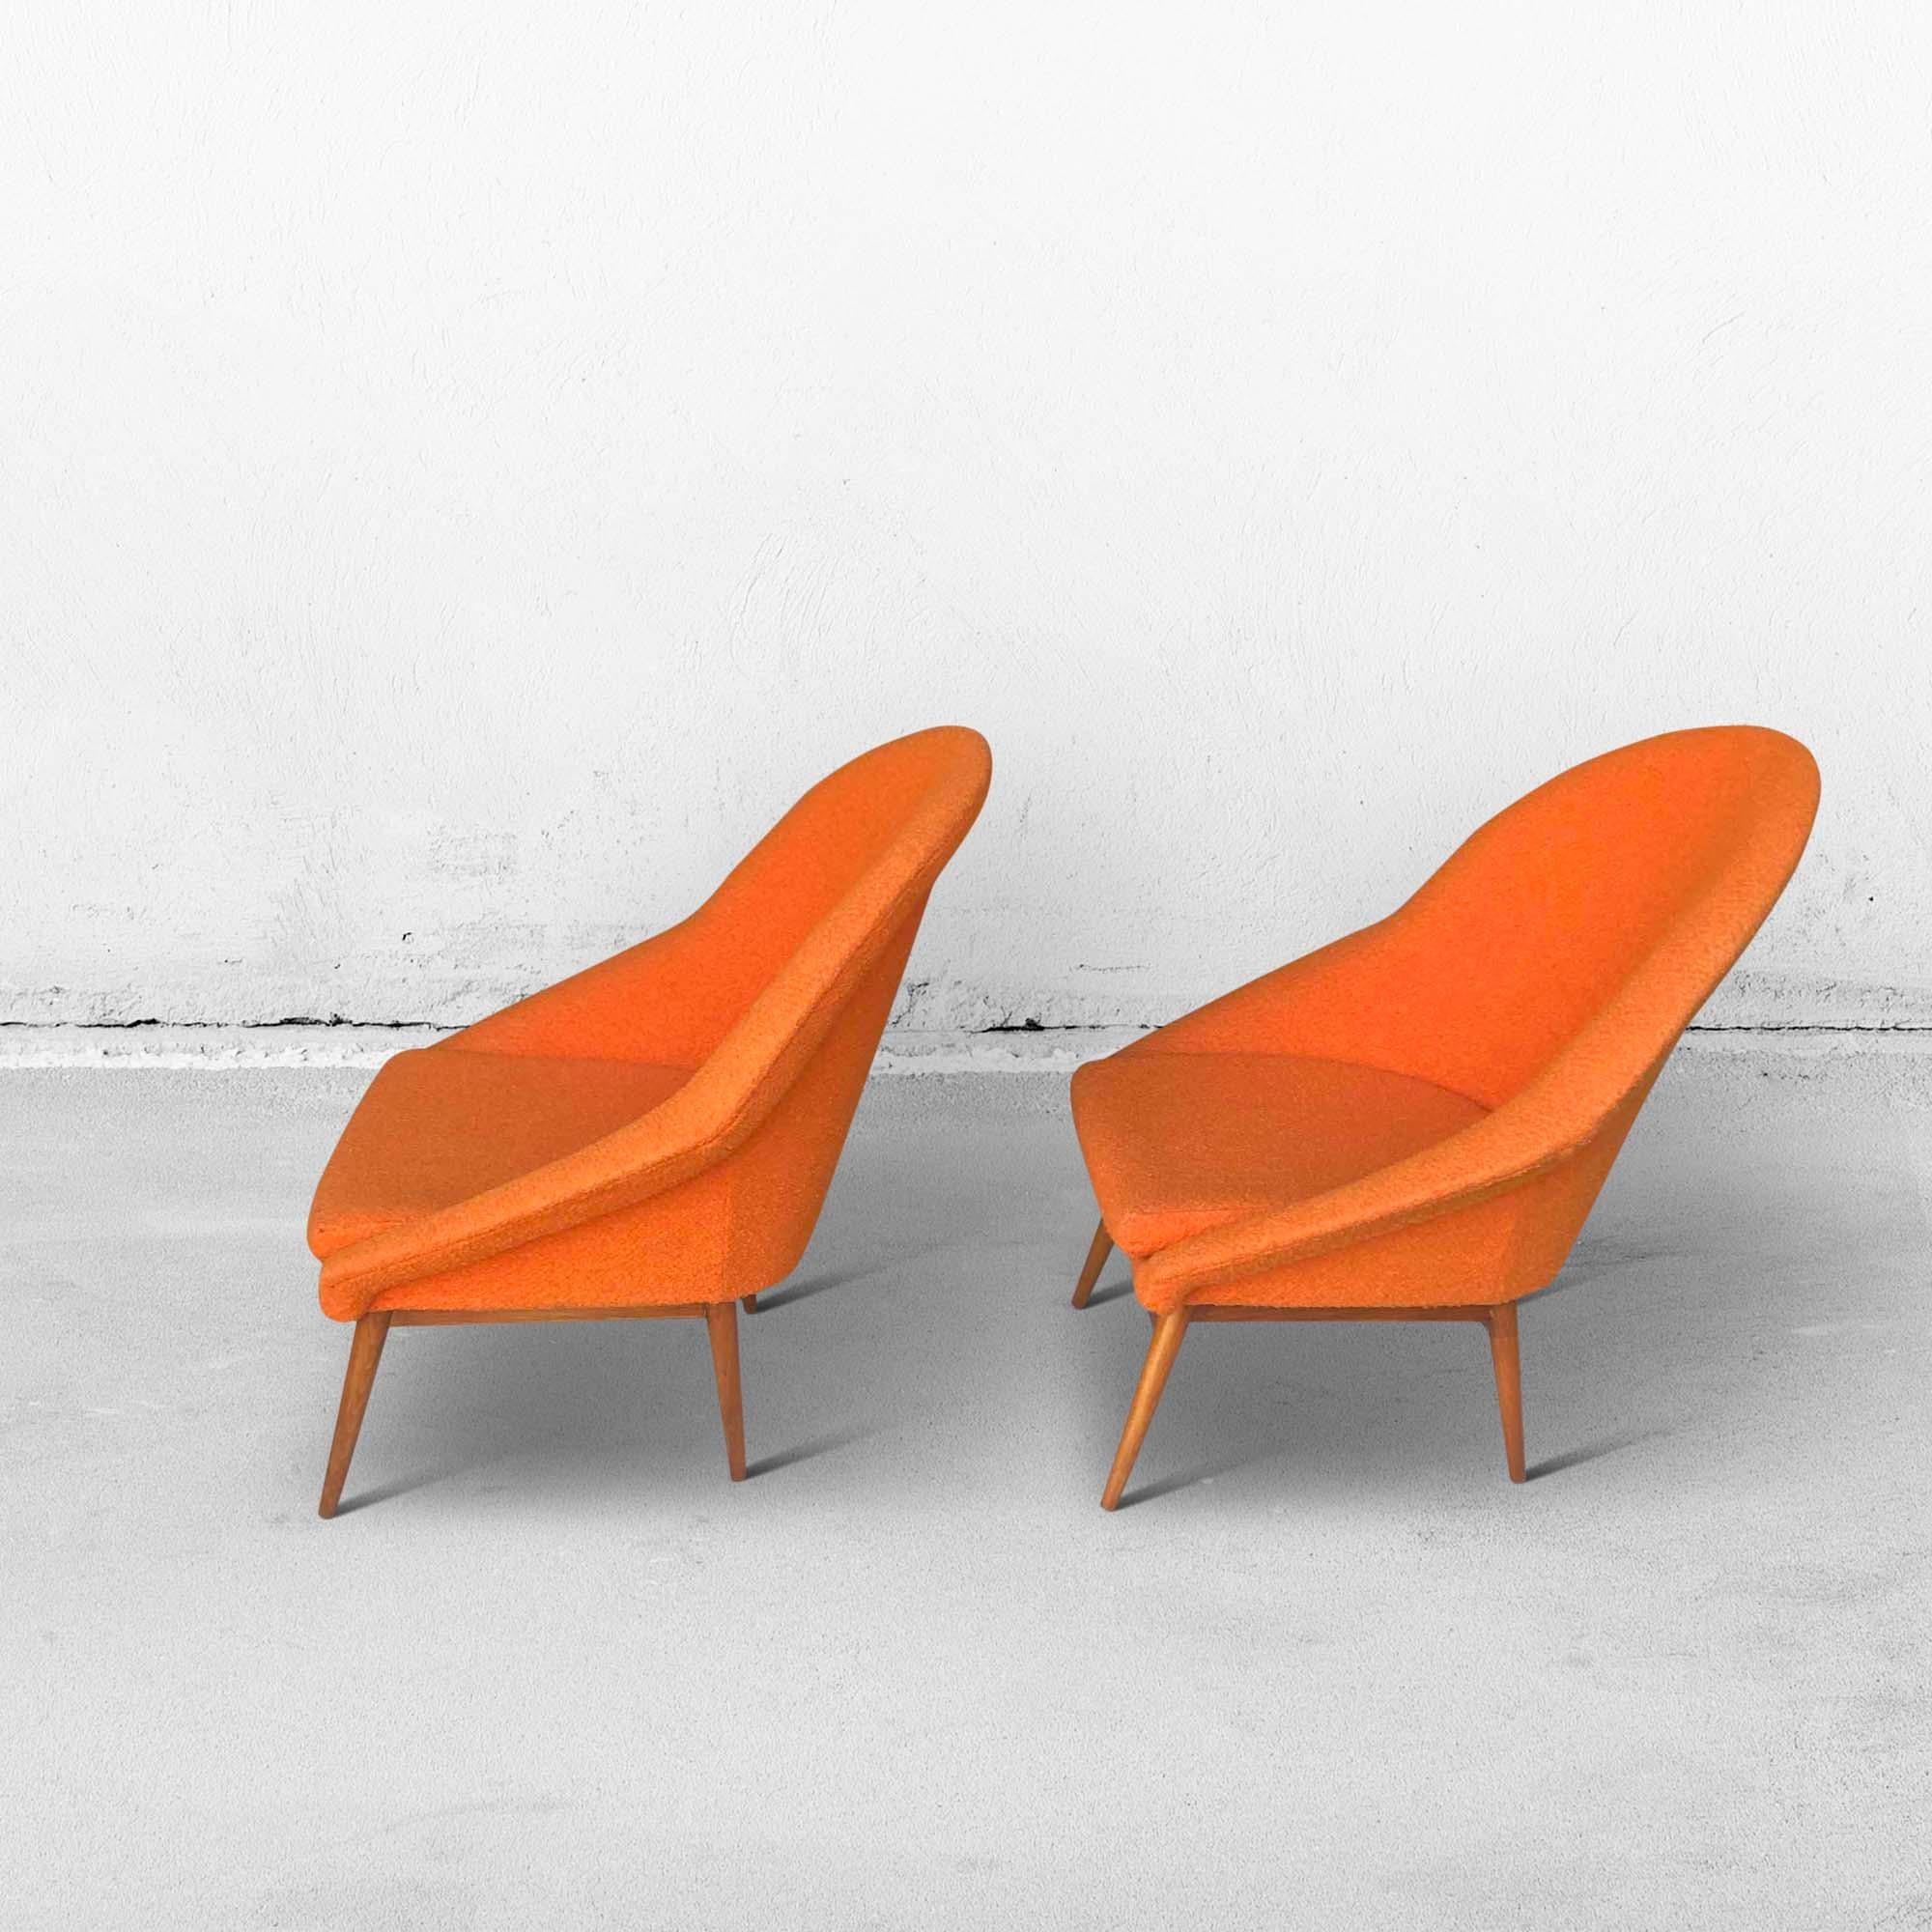 A set of bucket seats in a deep orange color. These armchairs are from the 1960s. The fabric shows no stains or damage and the seating comfort is still very good. The wooden legs are still very sturdy and have been repainted.

Eastern Europe,